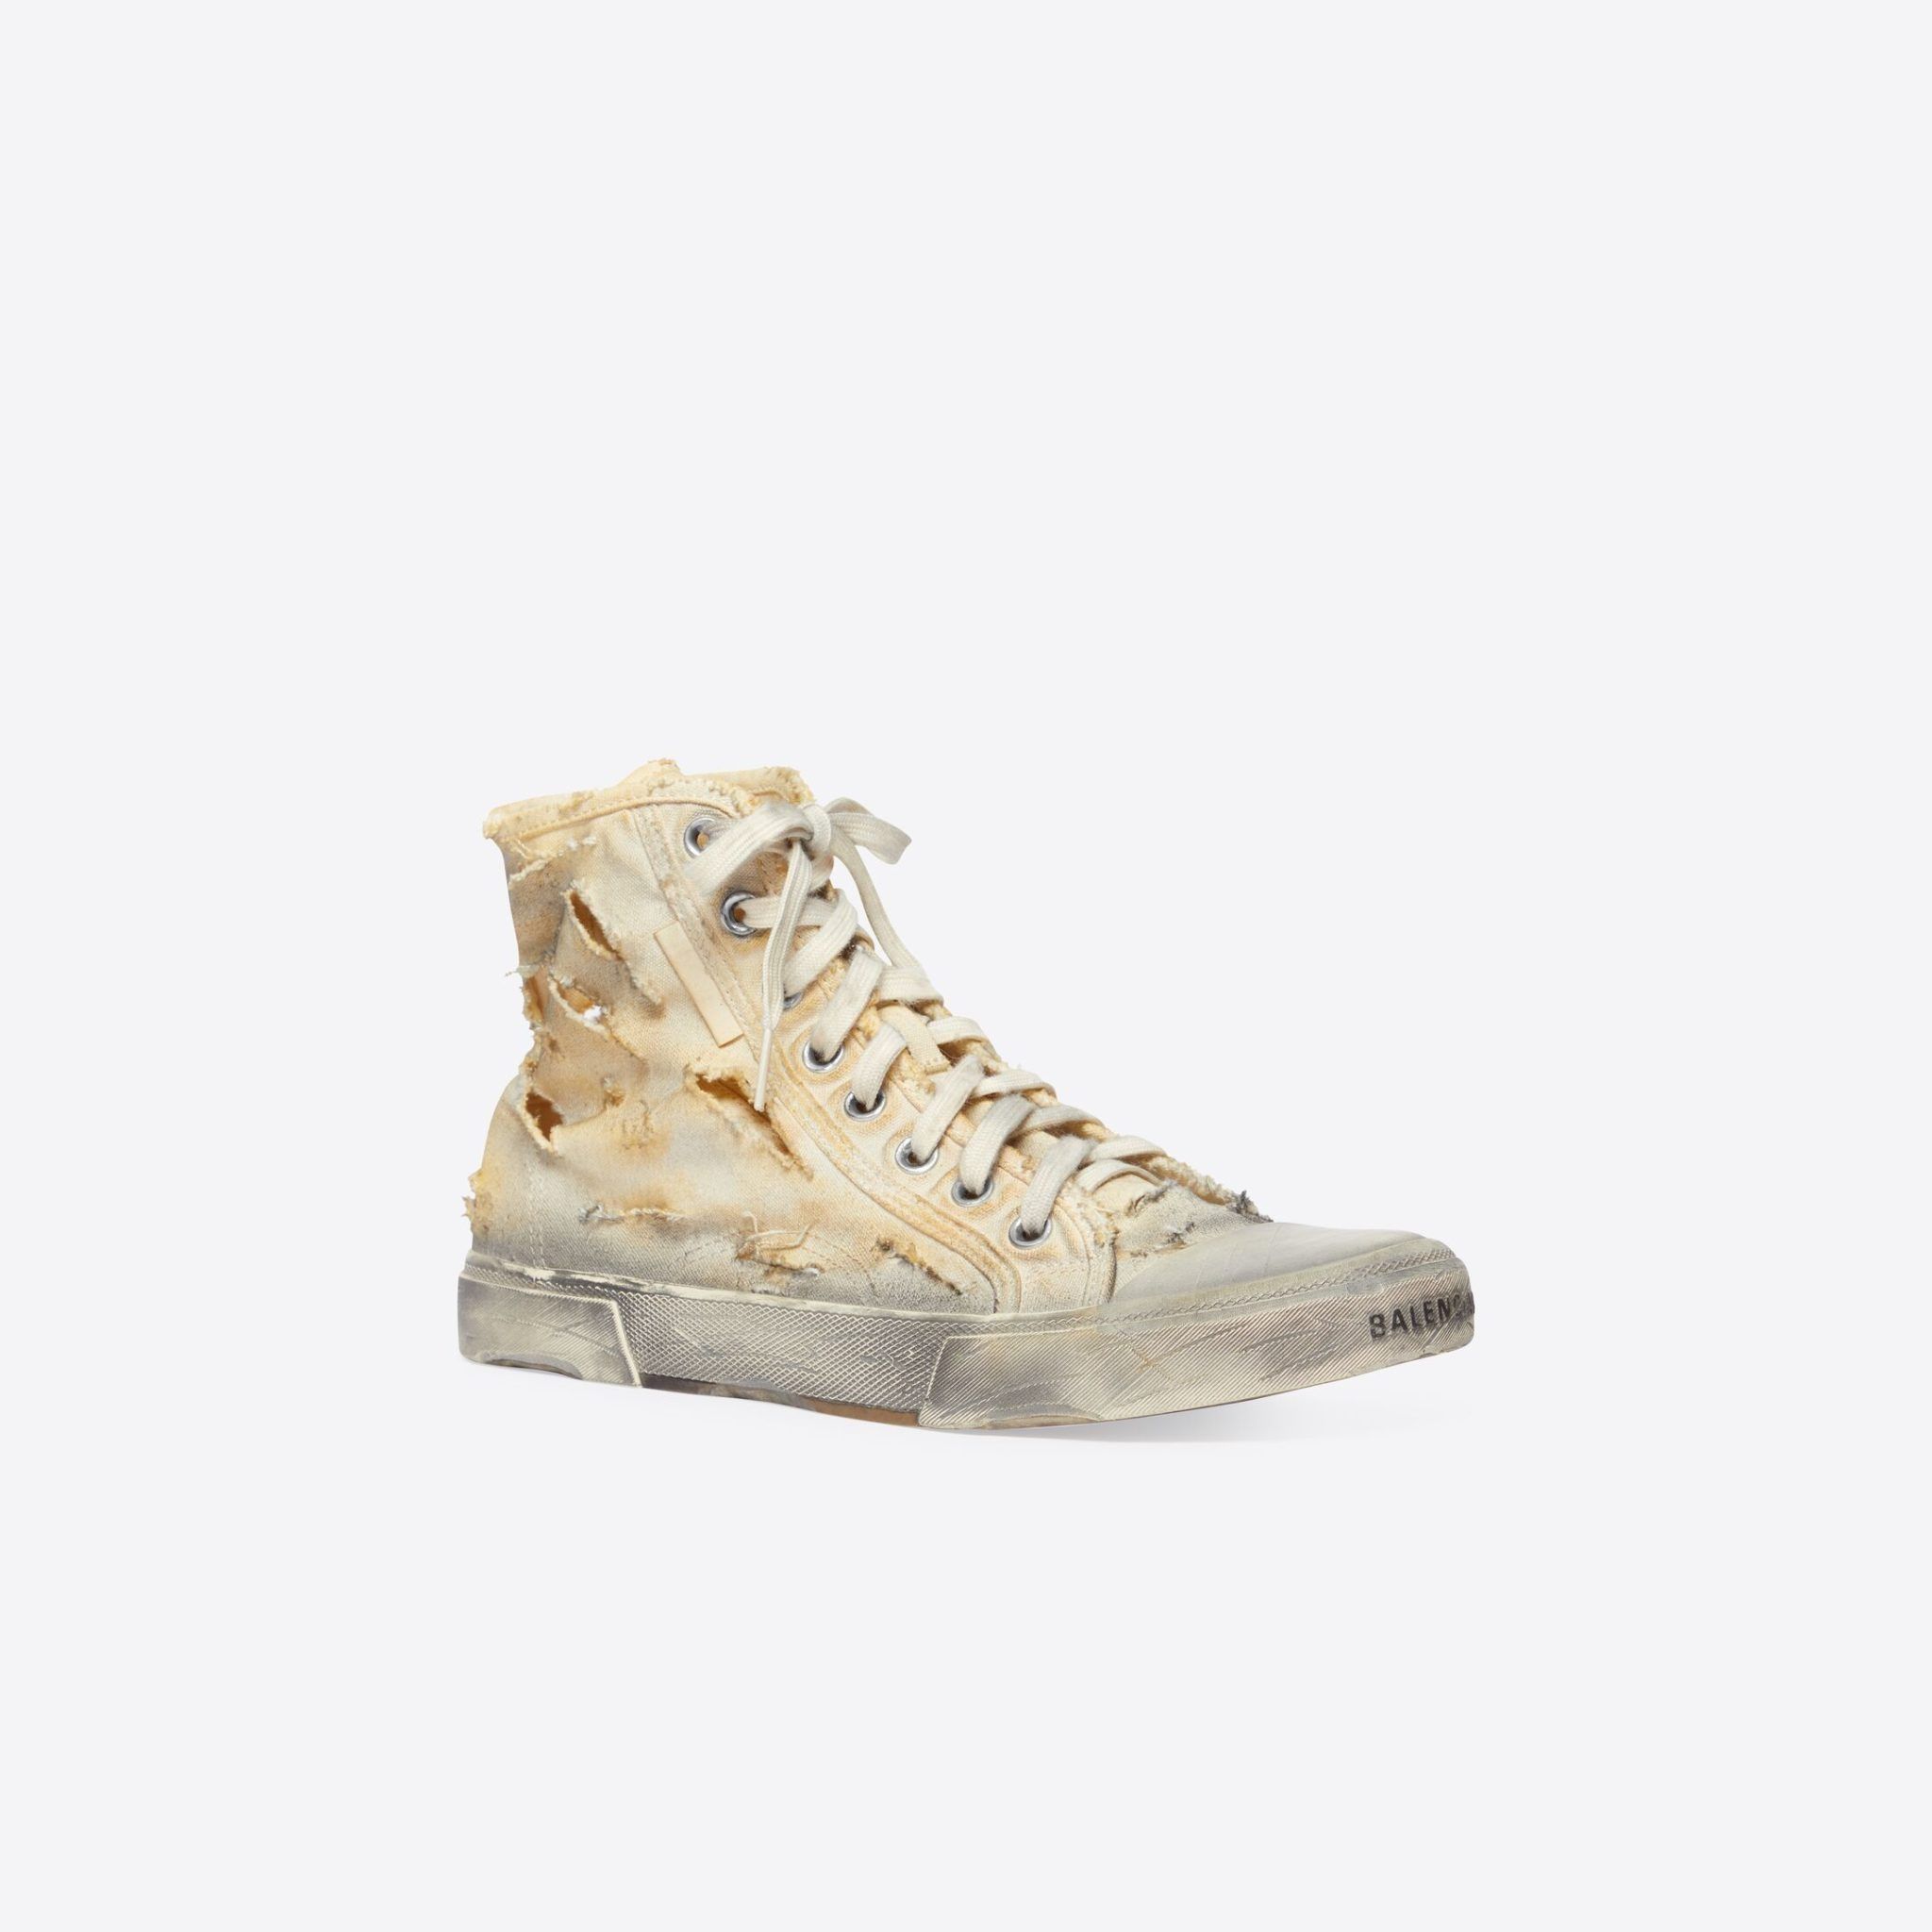 Balenciaga is selling destroyed sneakers for up to THB 64,000